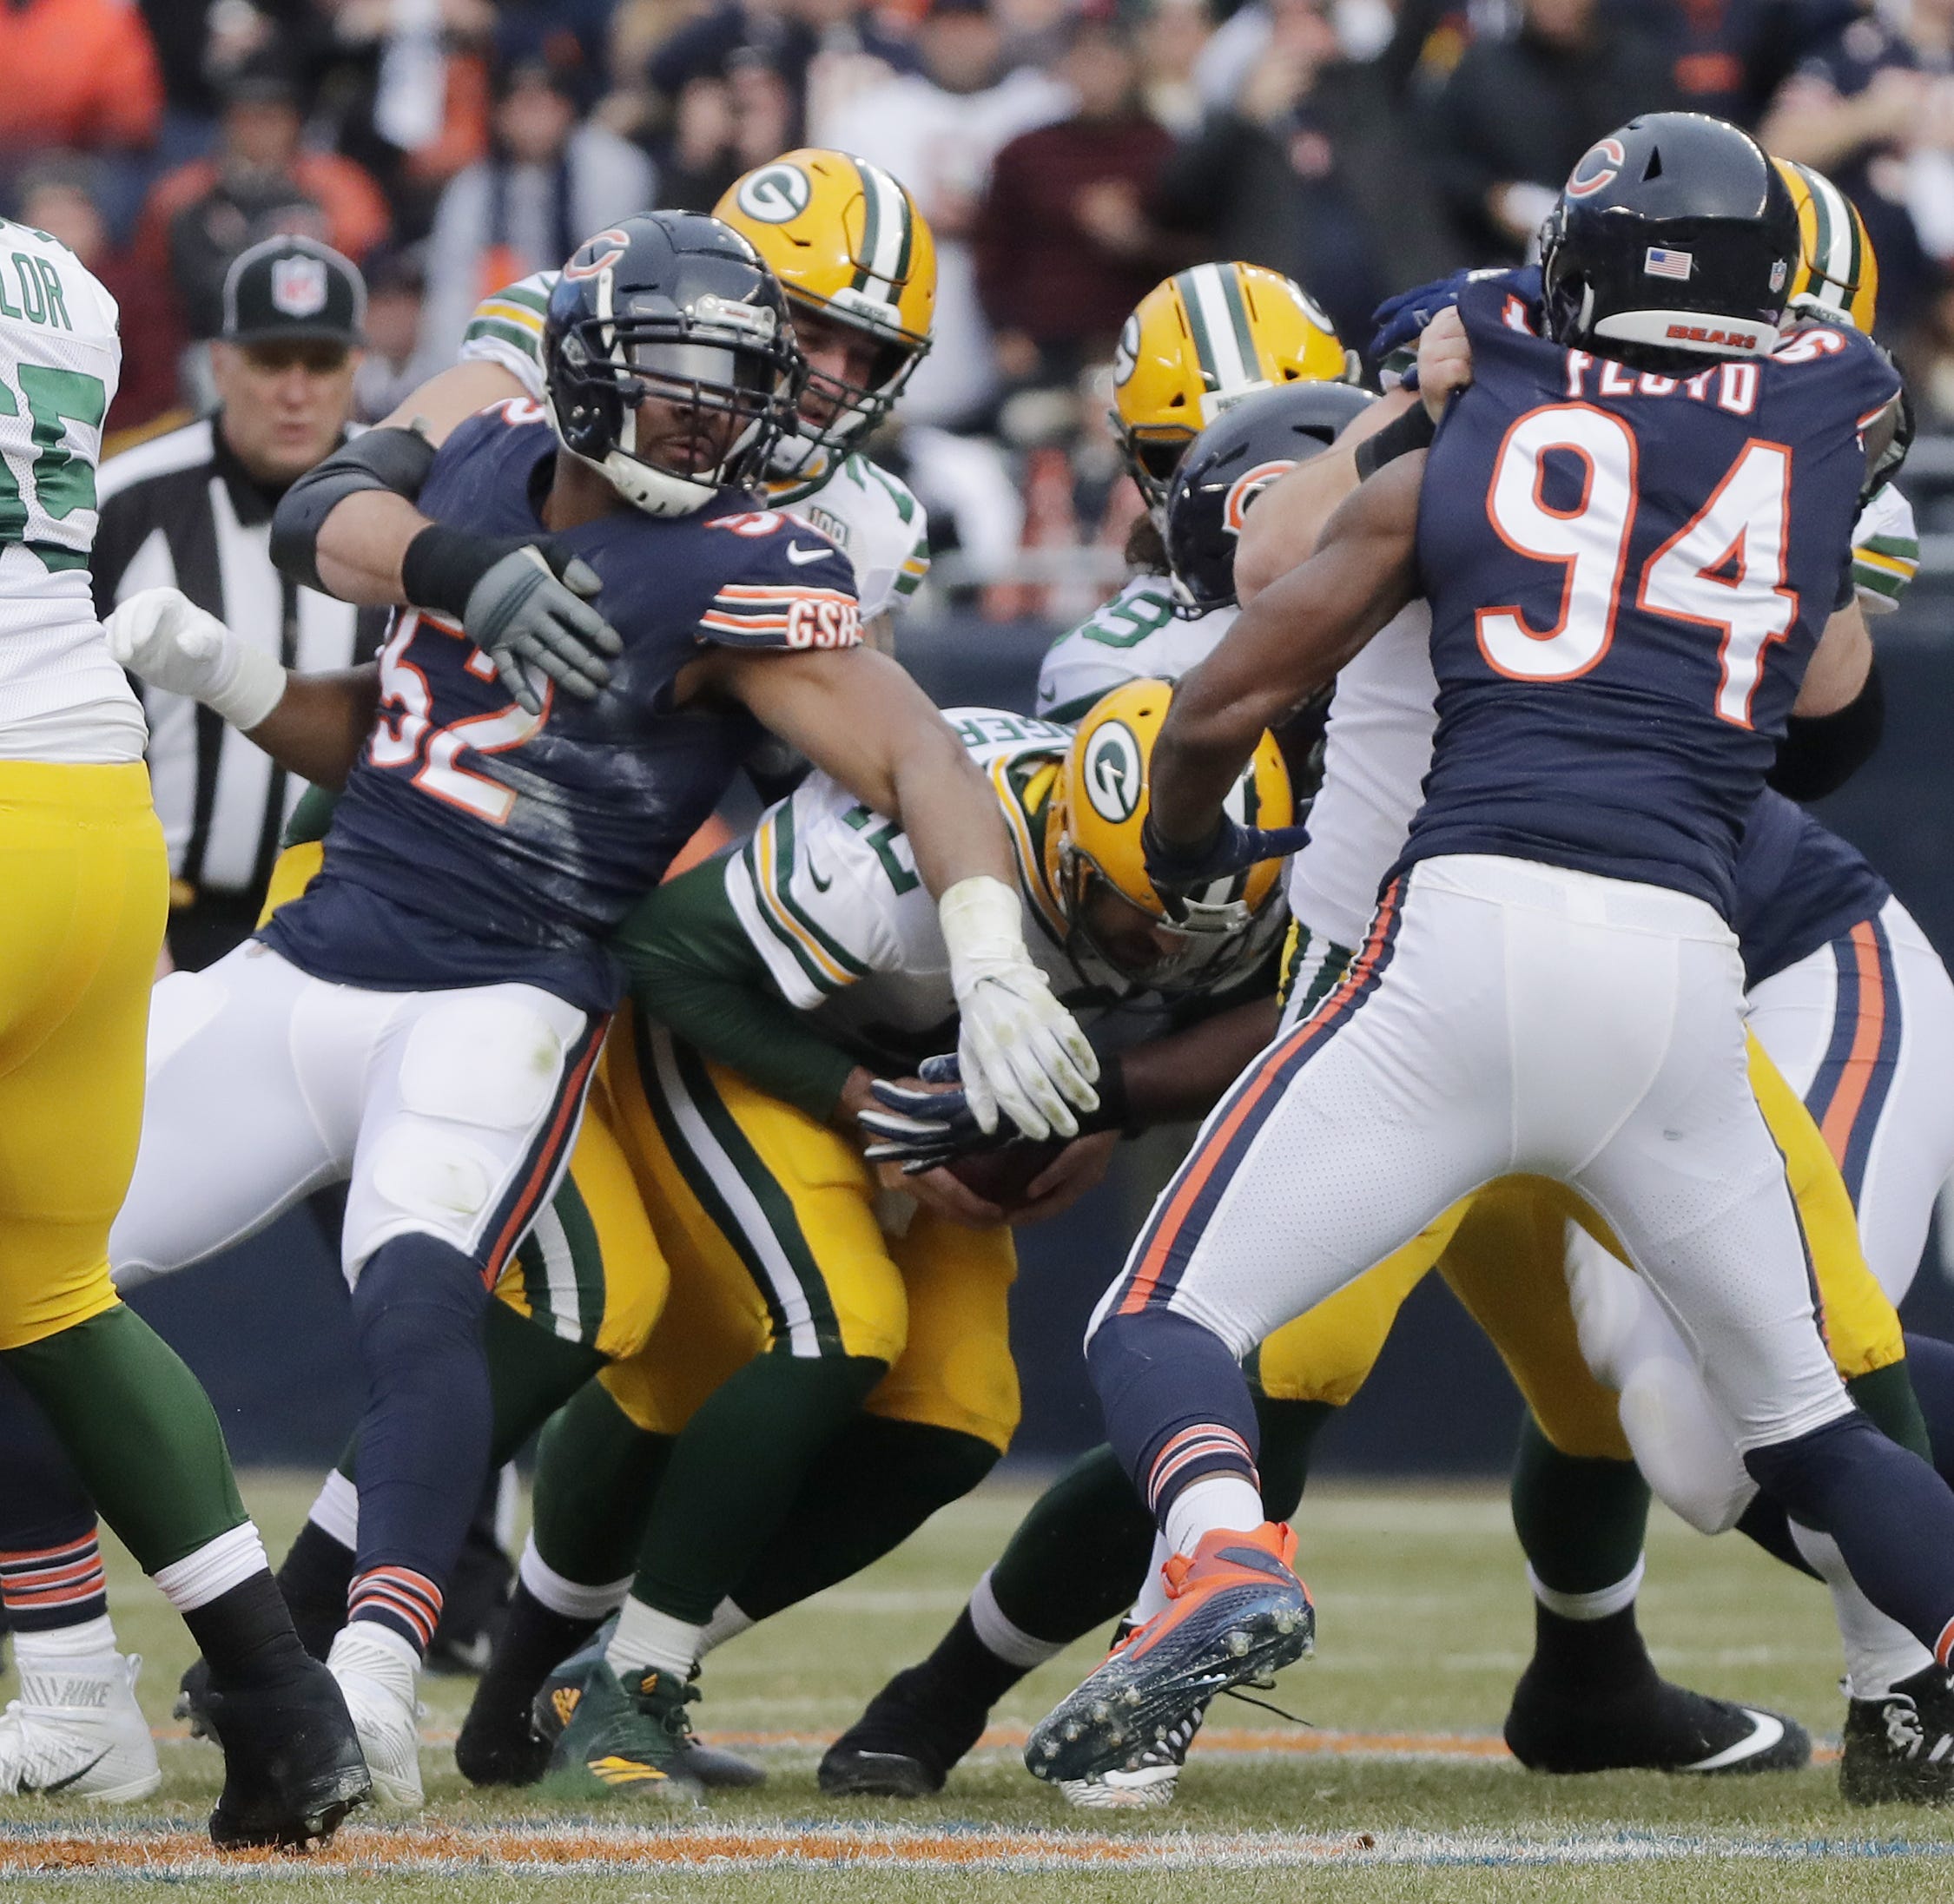 Chicago Bears outside linebacker Khalil Mack (52) sacks Green Bay Packers quarterback Aaron Rodgers (12) in the first quarter at Soldier Field on Sunday, December 16, 2018 in Chicago, Illinois.
Adam Wesley/USA TODAY NETWORK-Wis